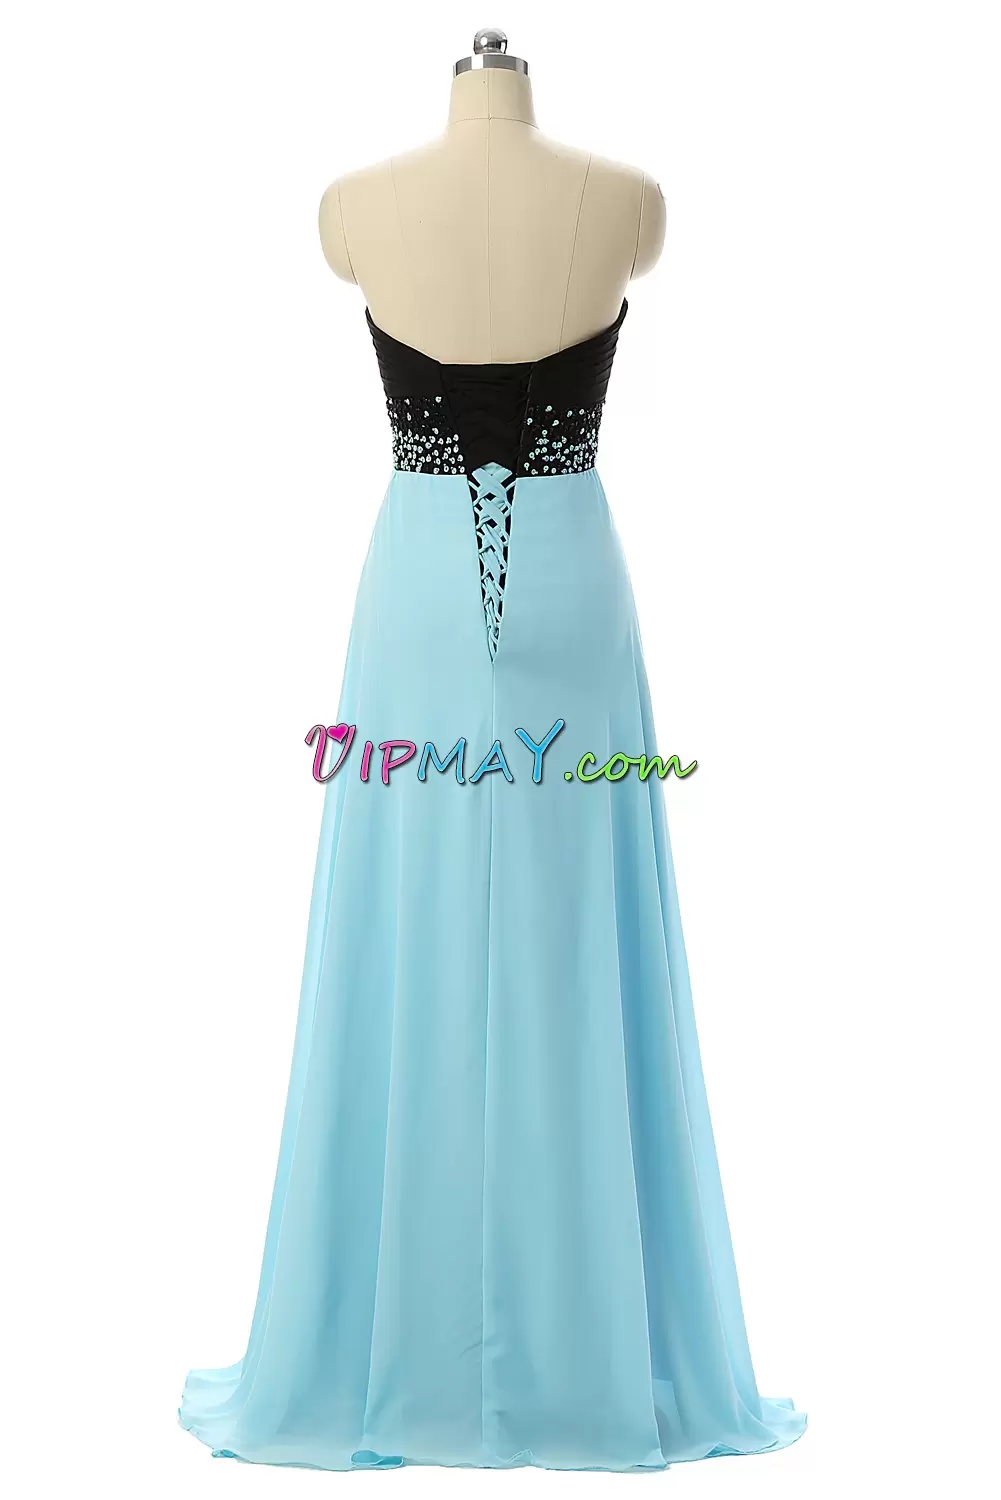 Chic Floor Length A-line Sleeveless Blue And Black Homecoming Dress Lace Up